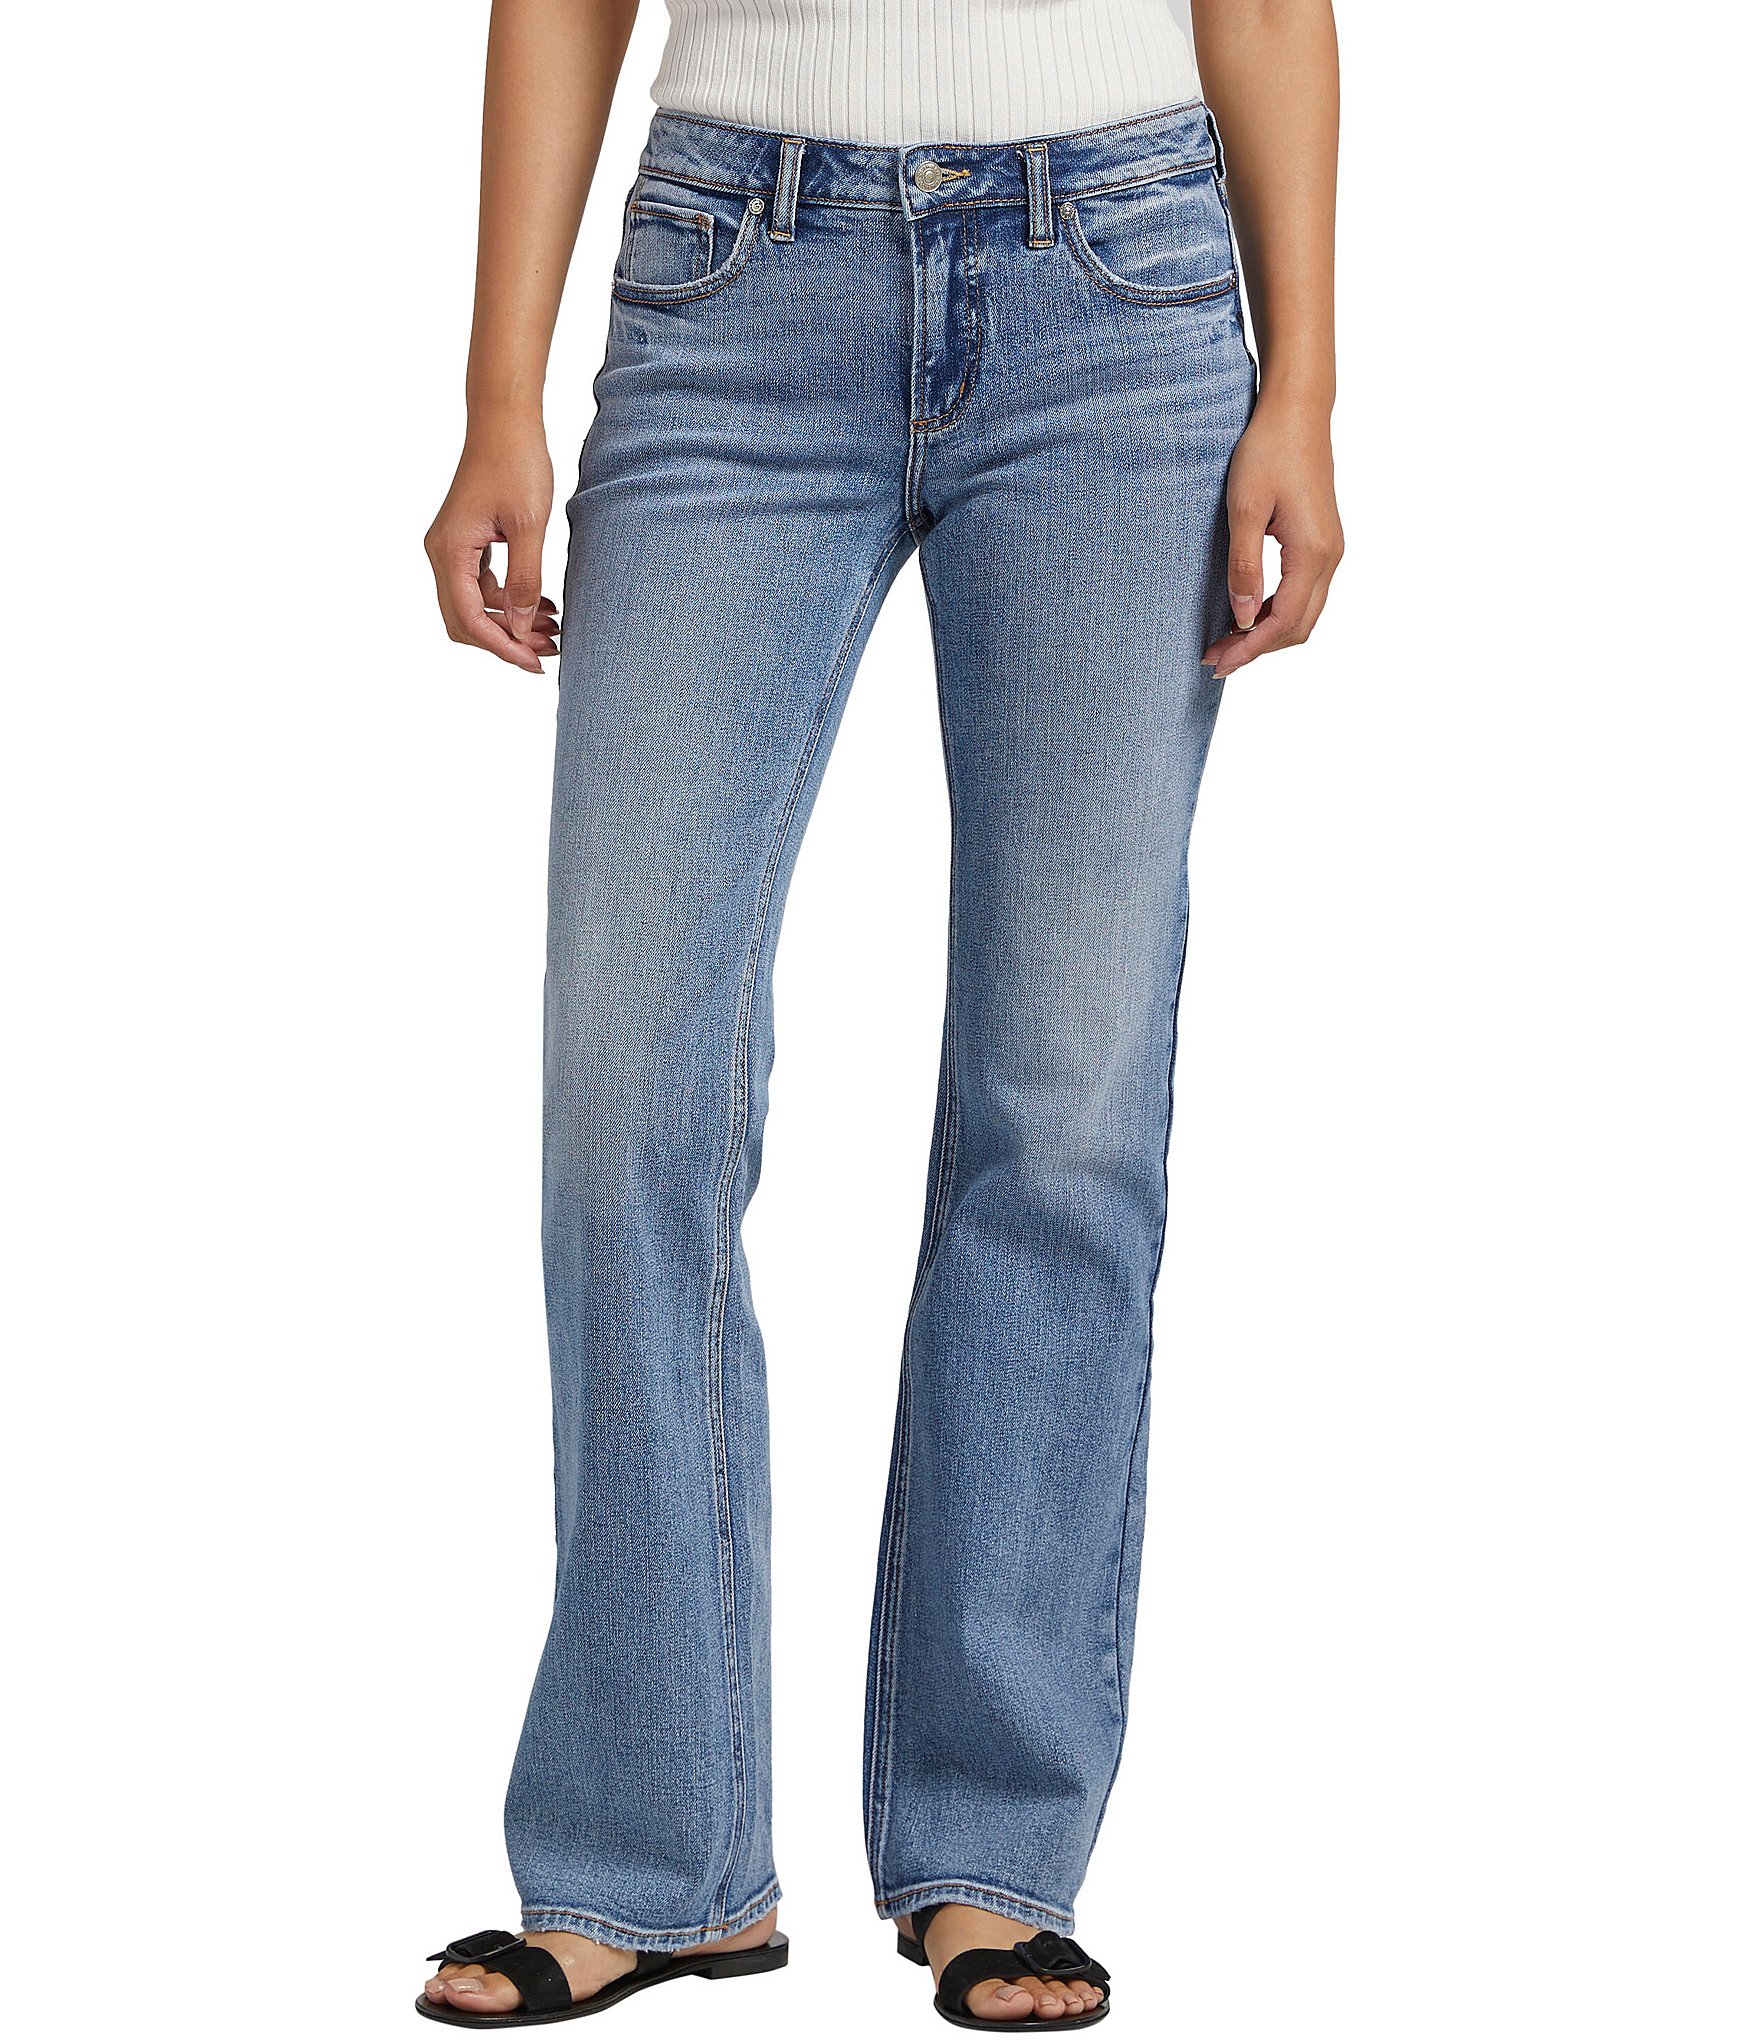 Silver Jeans Co. Tuesday Slim Low Rise Bootcut Jeans